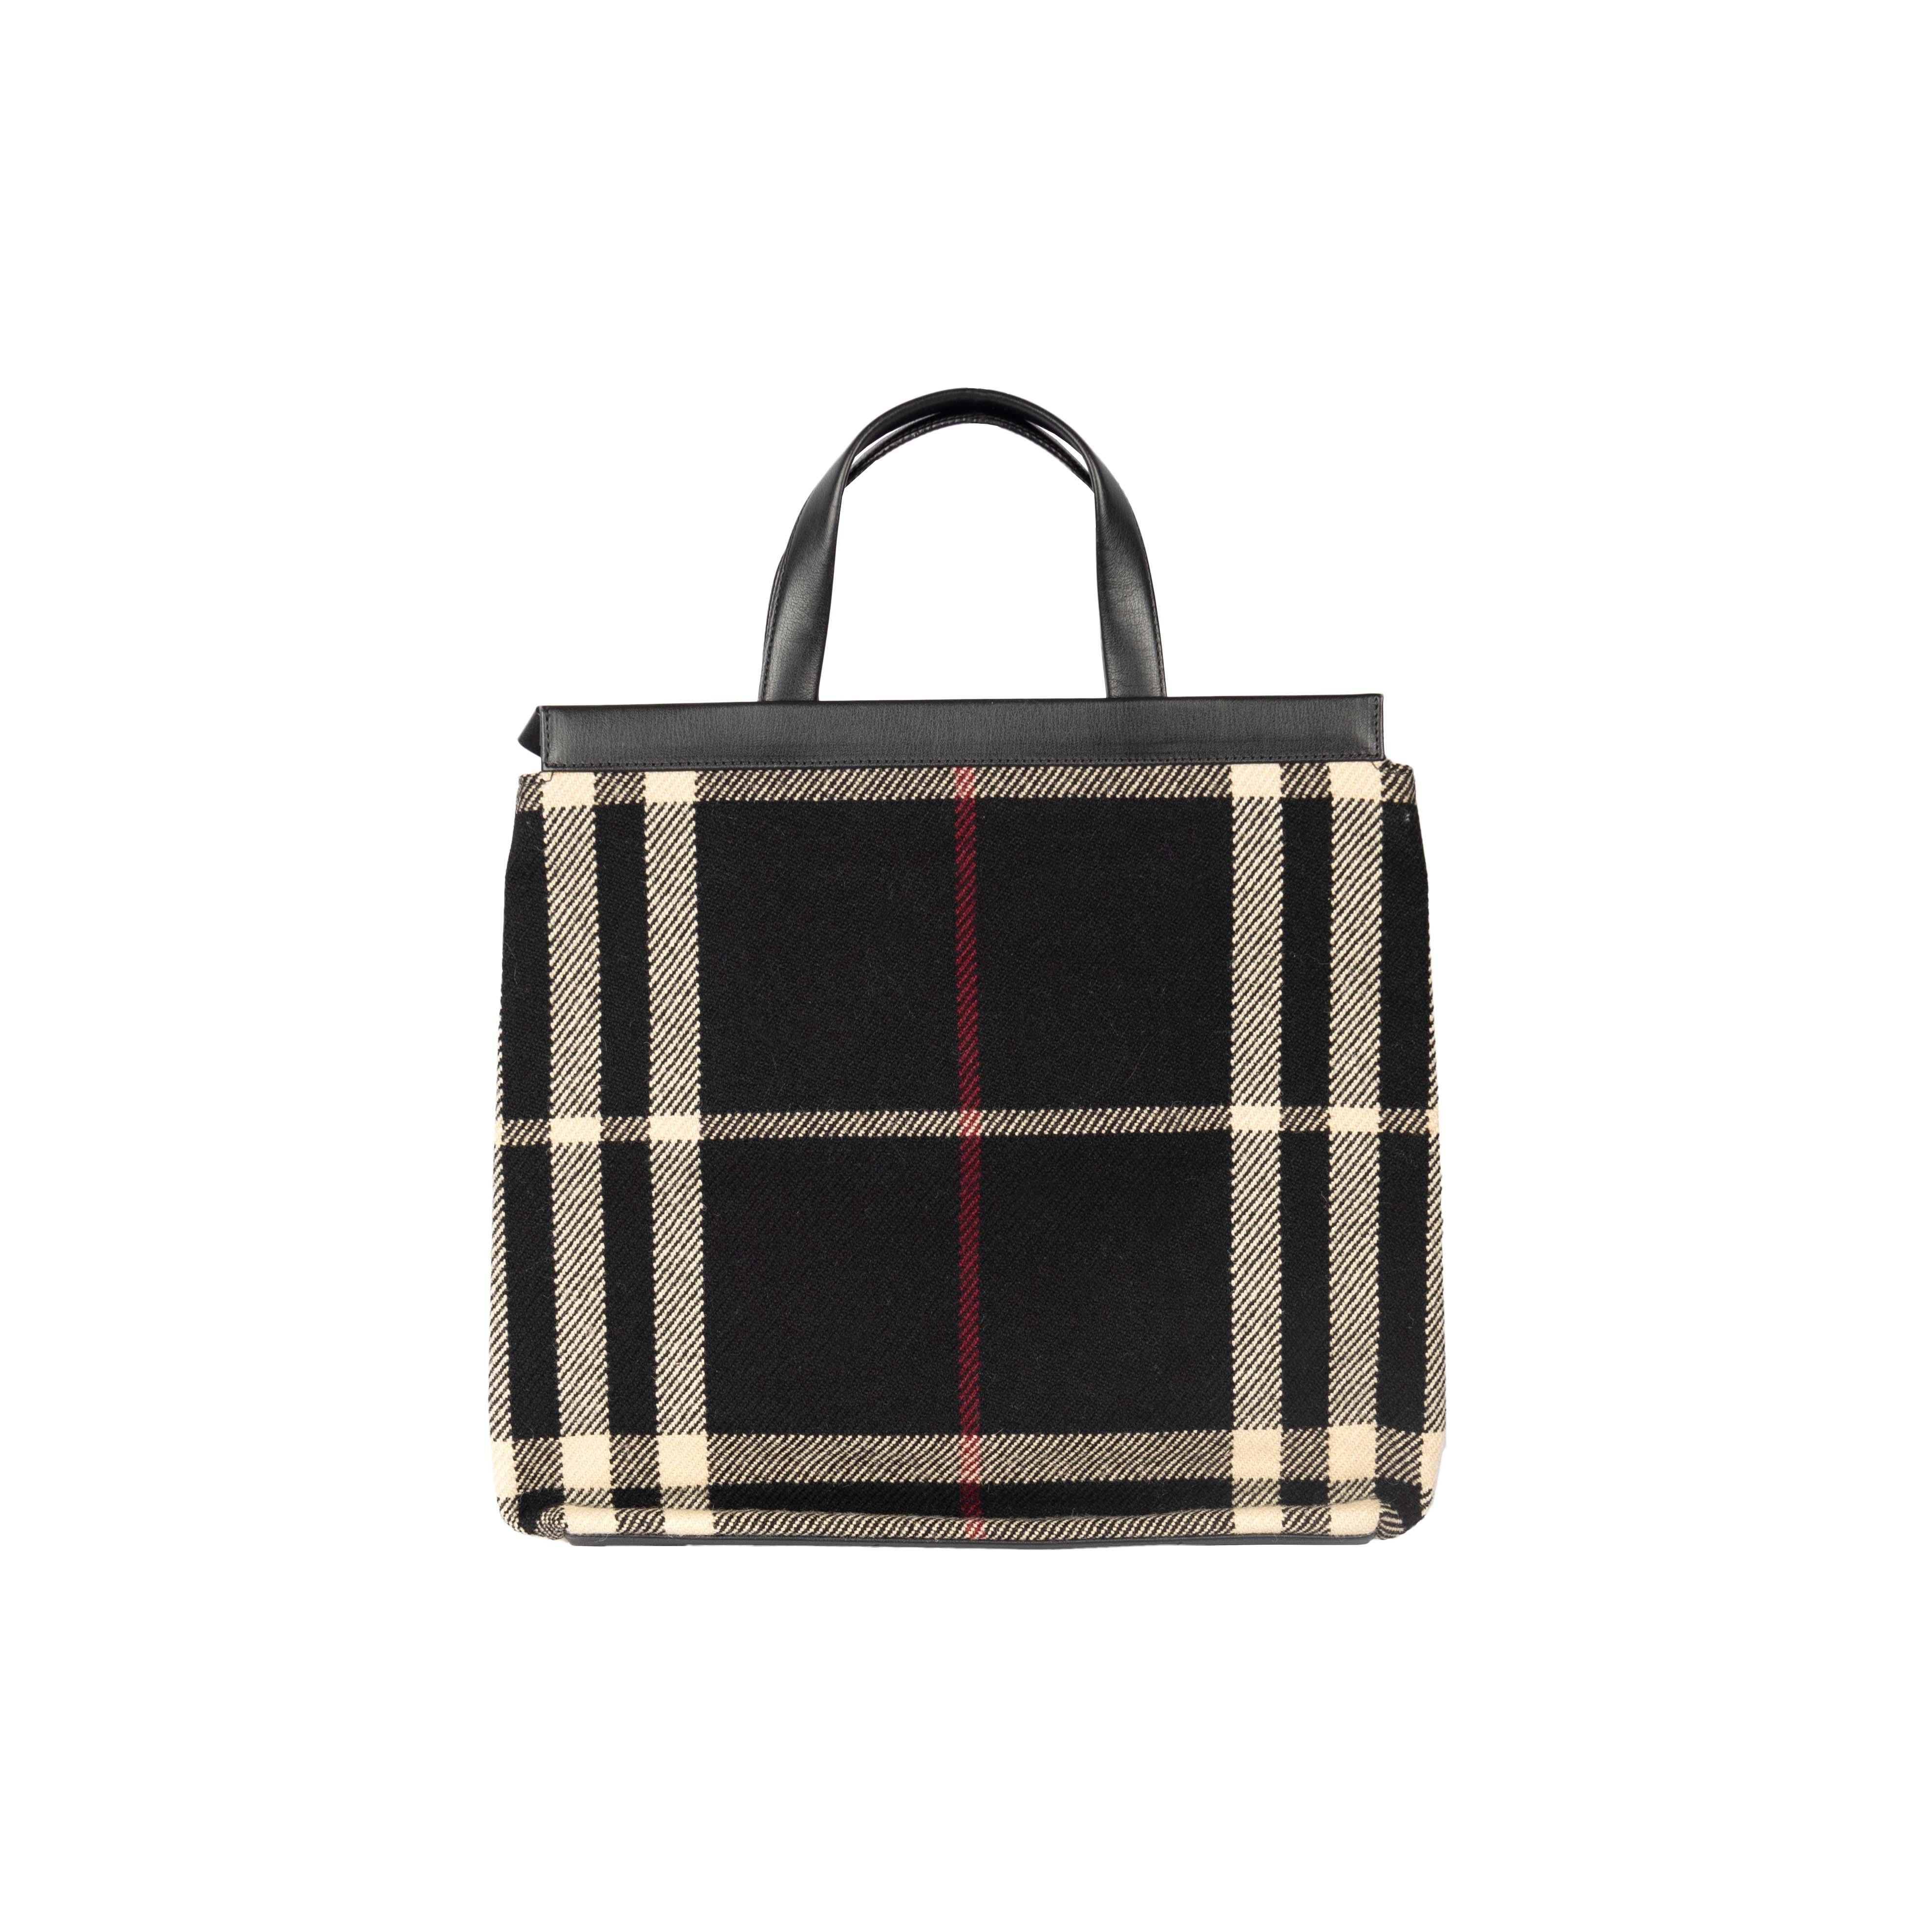 The Burberry Blanket Tote features the brand's signature plaid design in black with a burgundy inner lining. Attached on the inner side is a wide brown pocket adorned with the brand label that is perfect to store small essentials.

